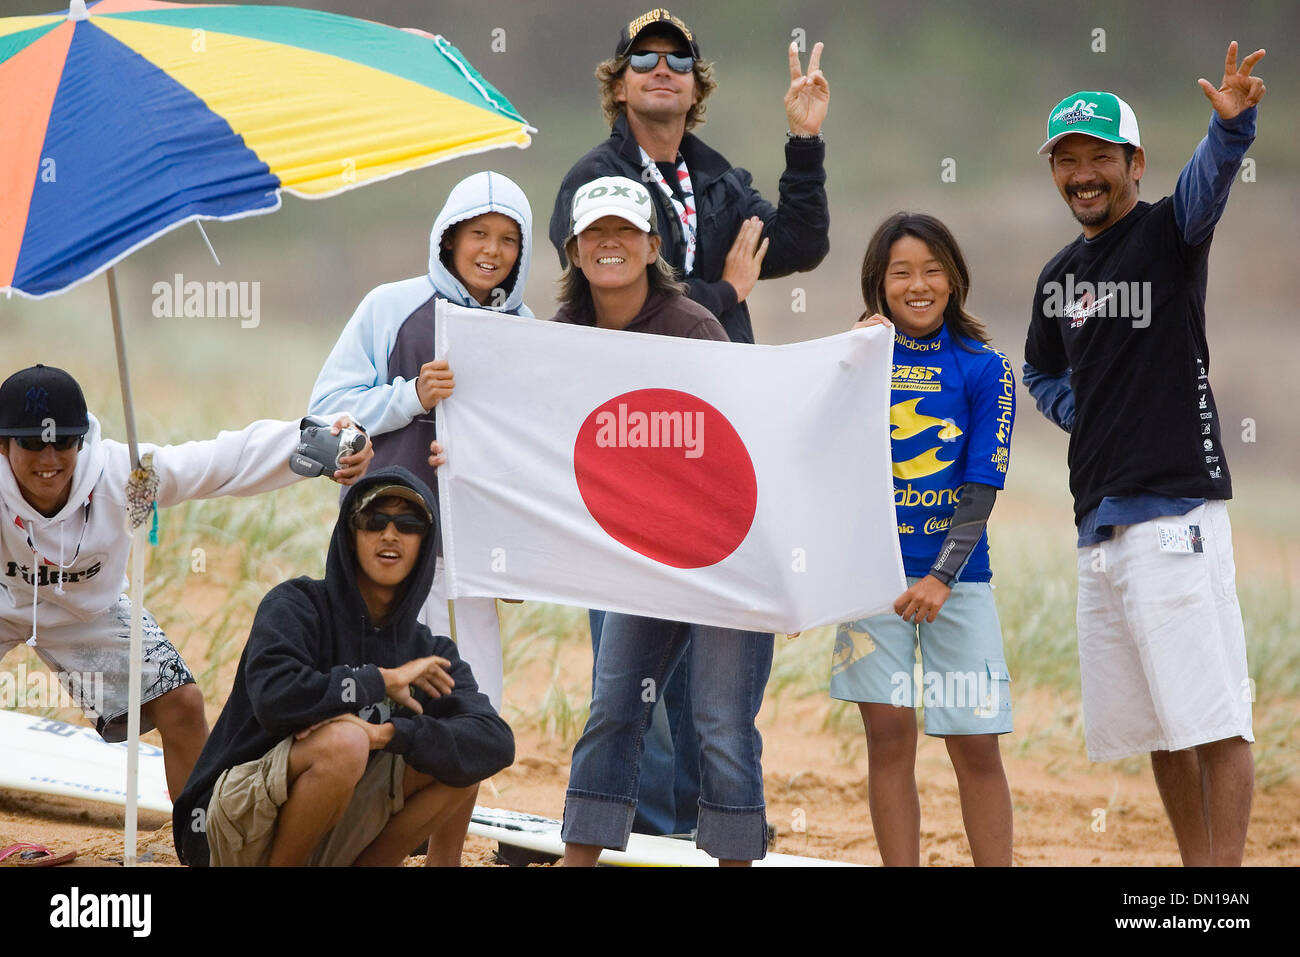 Jan 02, 2006; Narrabeen, NSW, Australia; The Japanese contingent taking part in the Billabong World Junior Championships were delighted when one of their team members advanced to the quarter finals of the event taking place at Narrabeen, NSW, Australia today. Mizuki Hagiwara (Japan) progressed to the quarter finals by beating Australian Rebecca Oakley (Sunshine Coast) in round thre Stock Photo